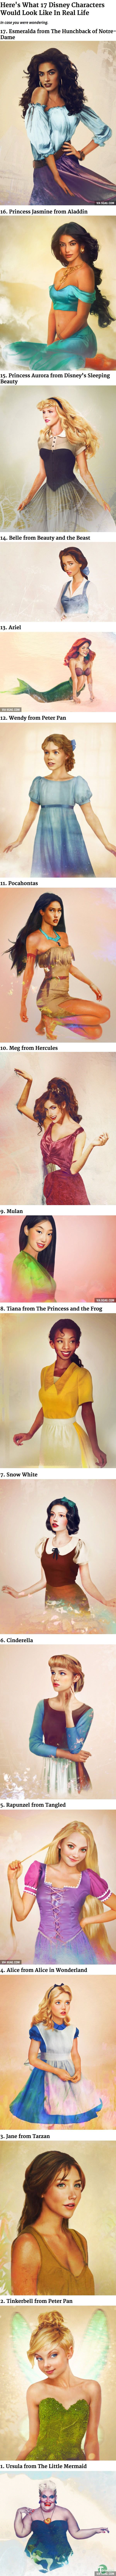 17 Disney Characters Would Look Like In Real Life